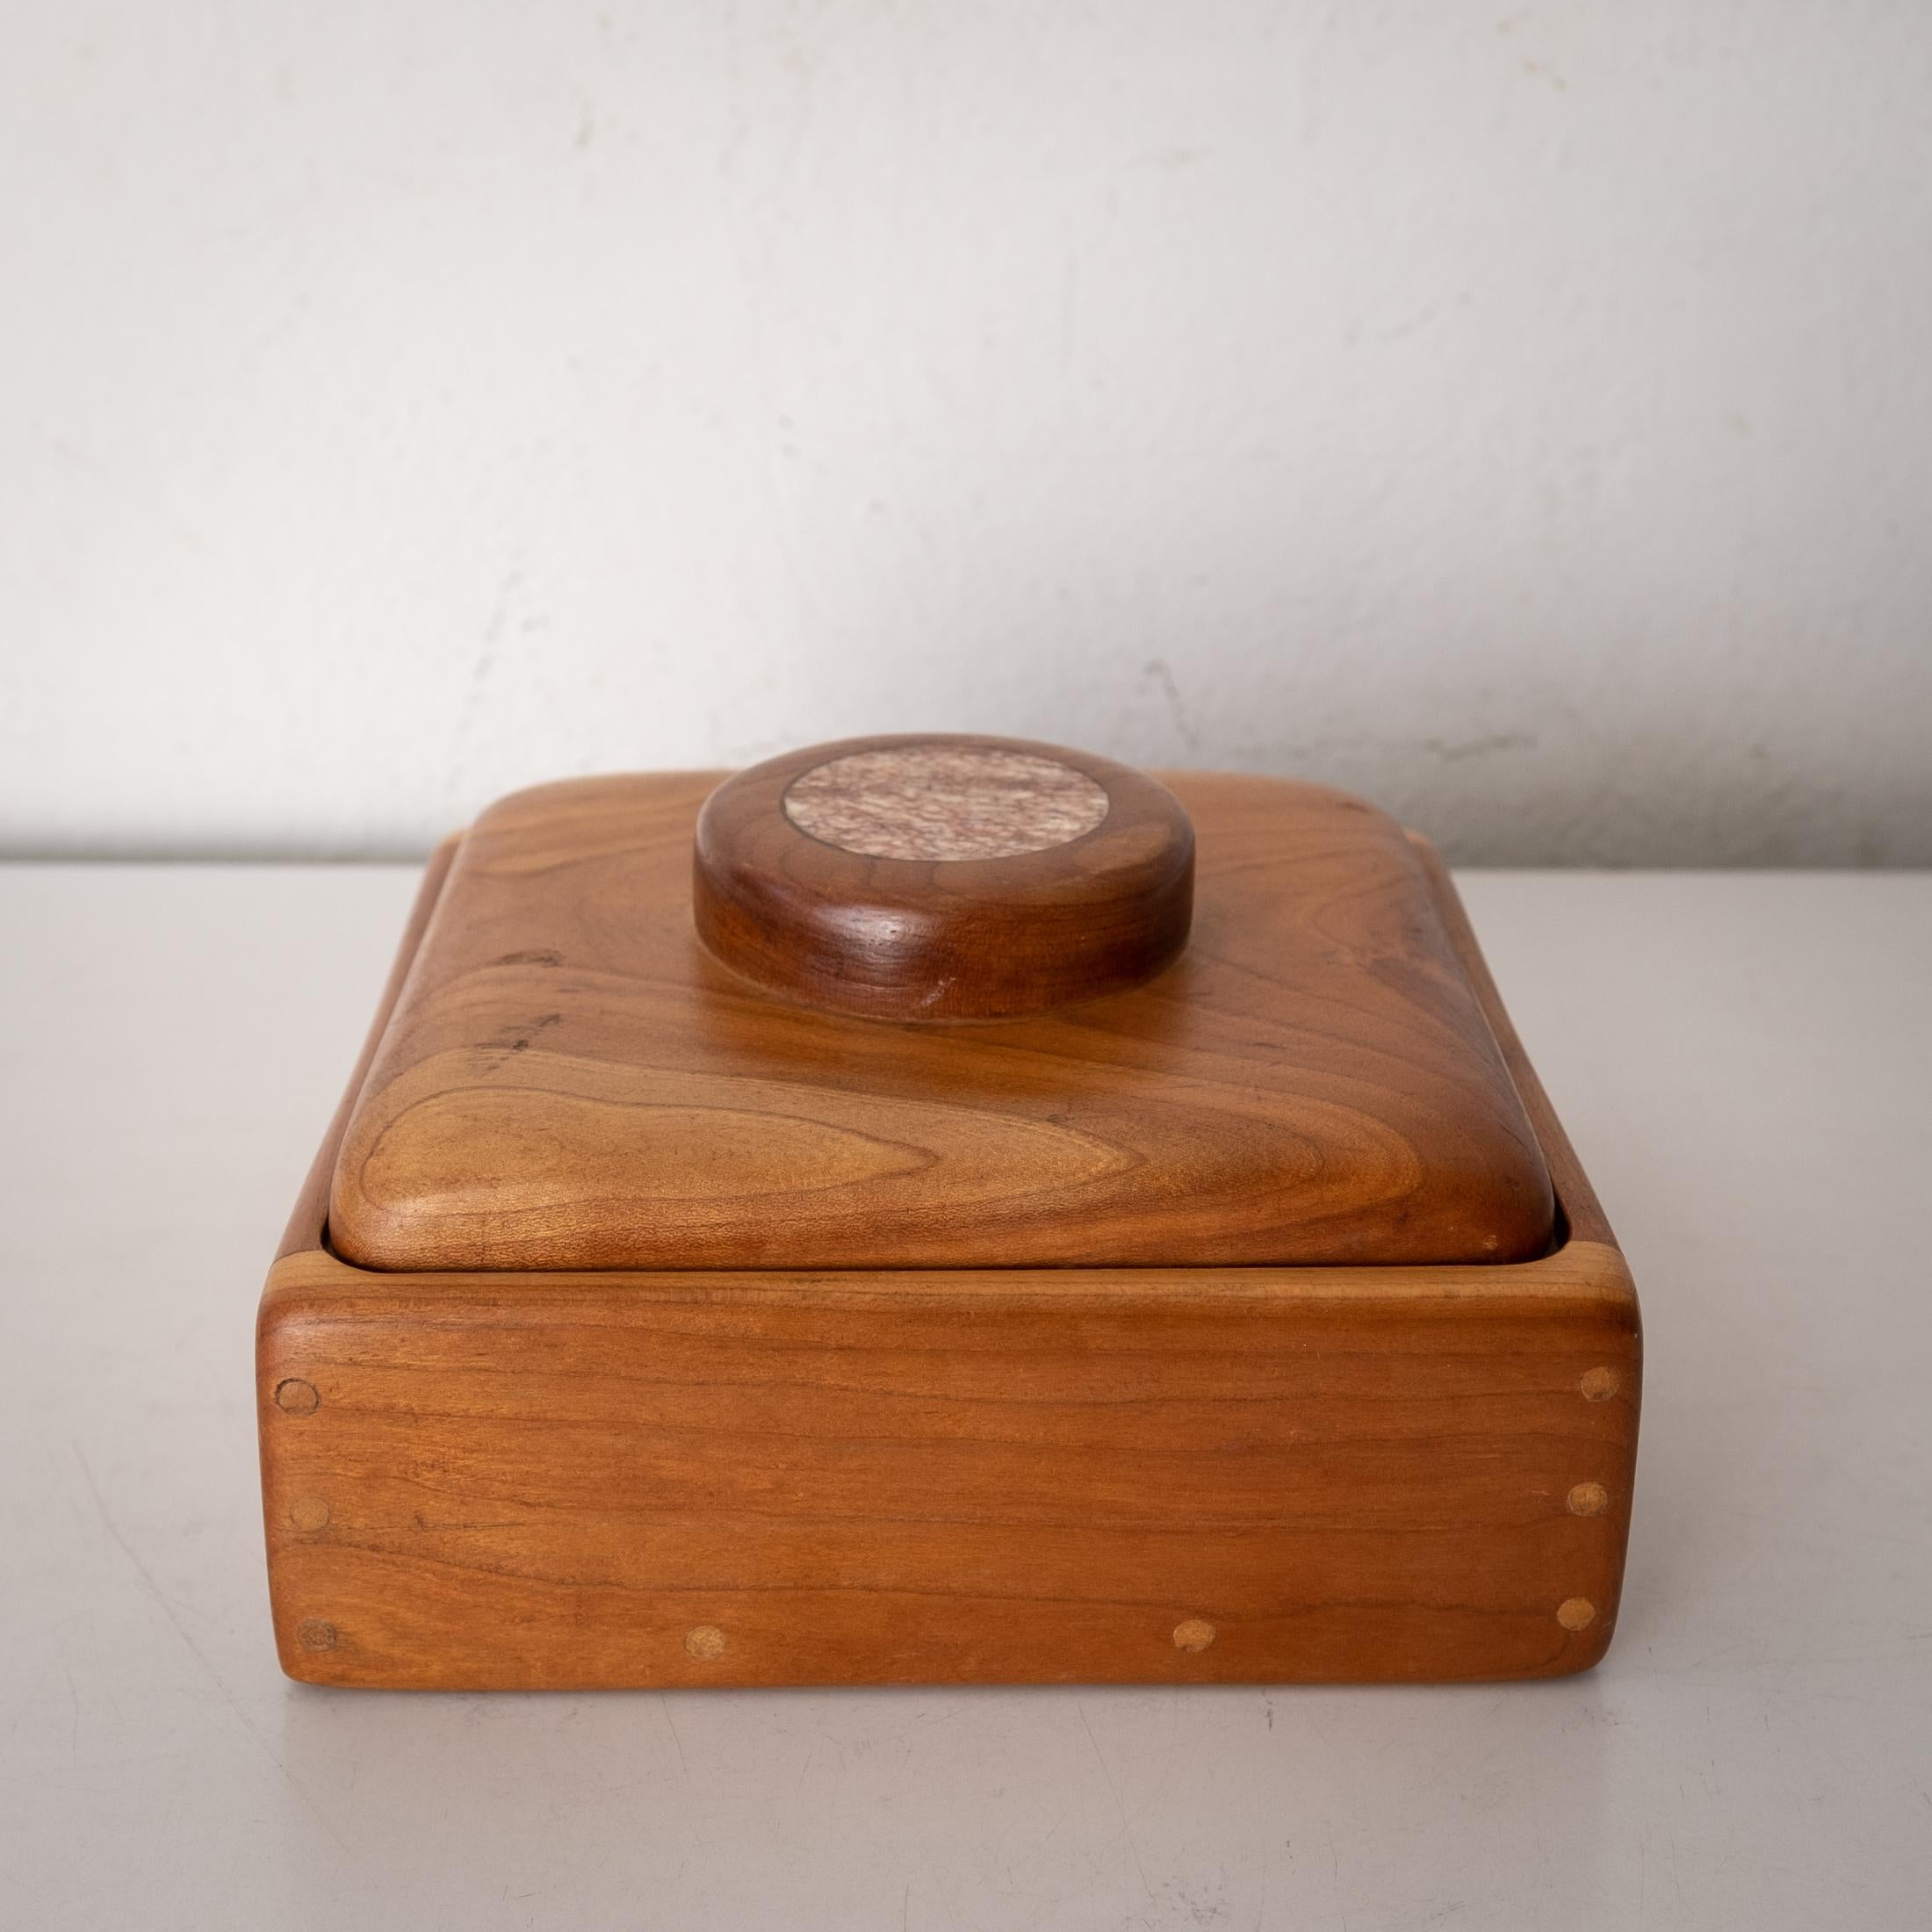 Mid-20th Century Studio Crafted Wood Jewelry Box With Marble Inlay 1960s For Sale